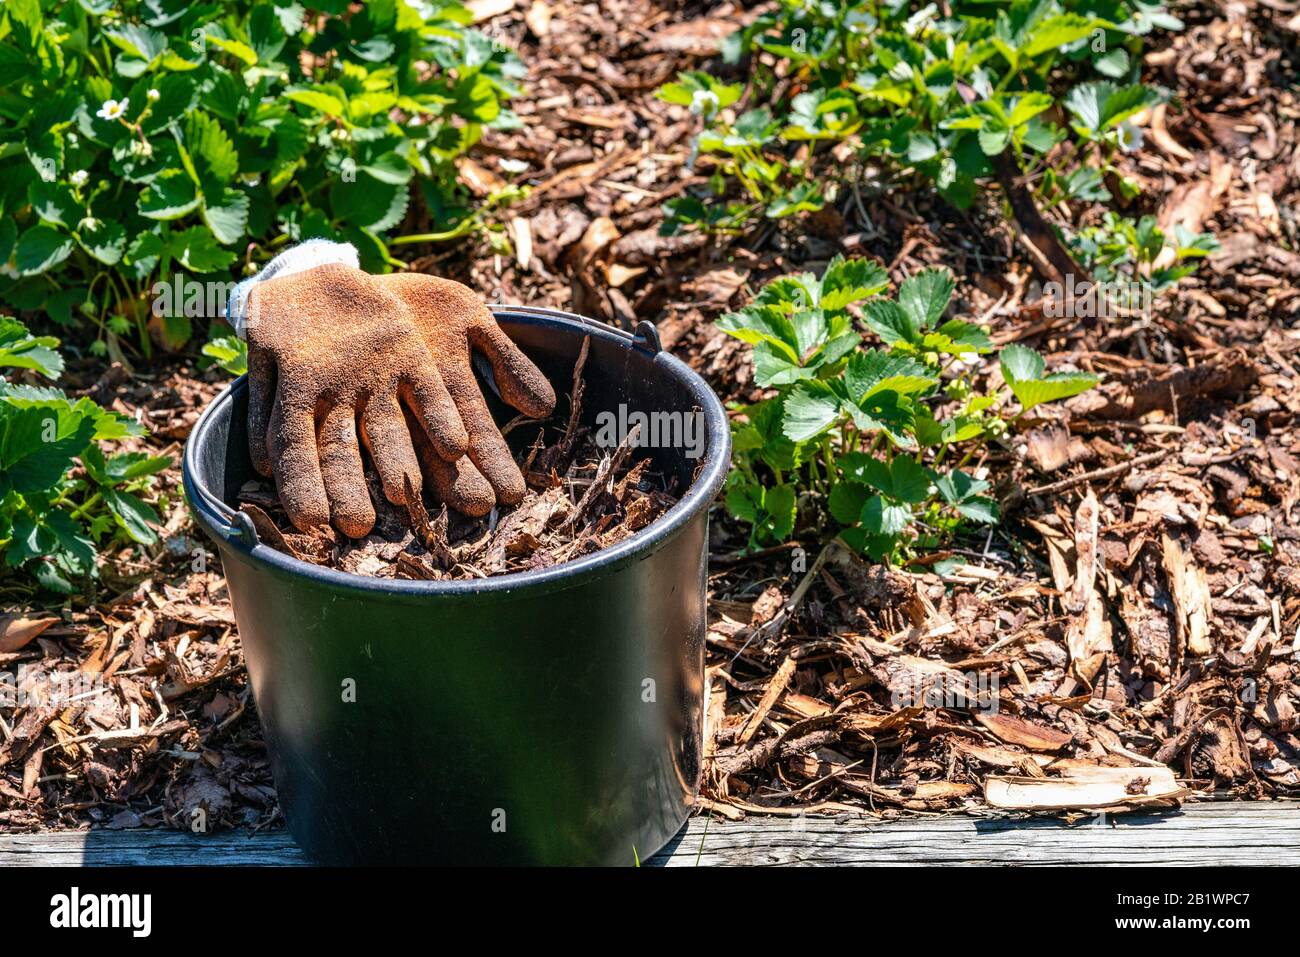 Black bucket with pine tree bark and orange garden gloves after work on strawberry bed. the whole soil is covered by bark to protect berries, pause Stock Photo